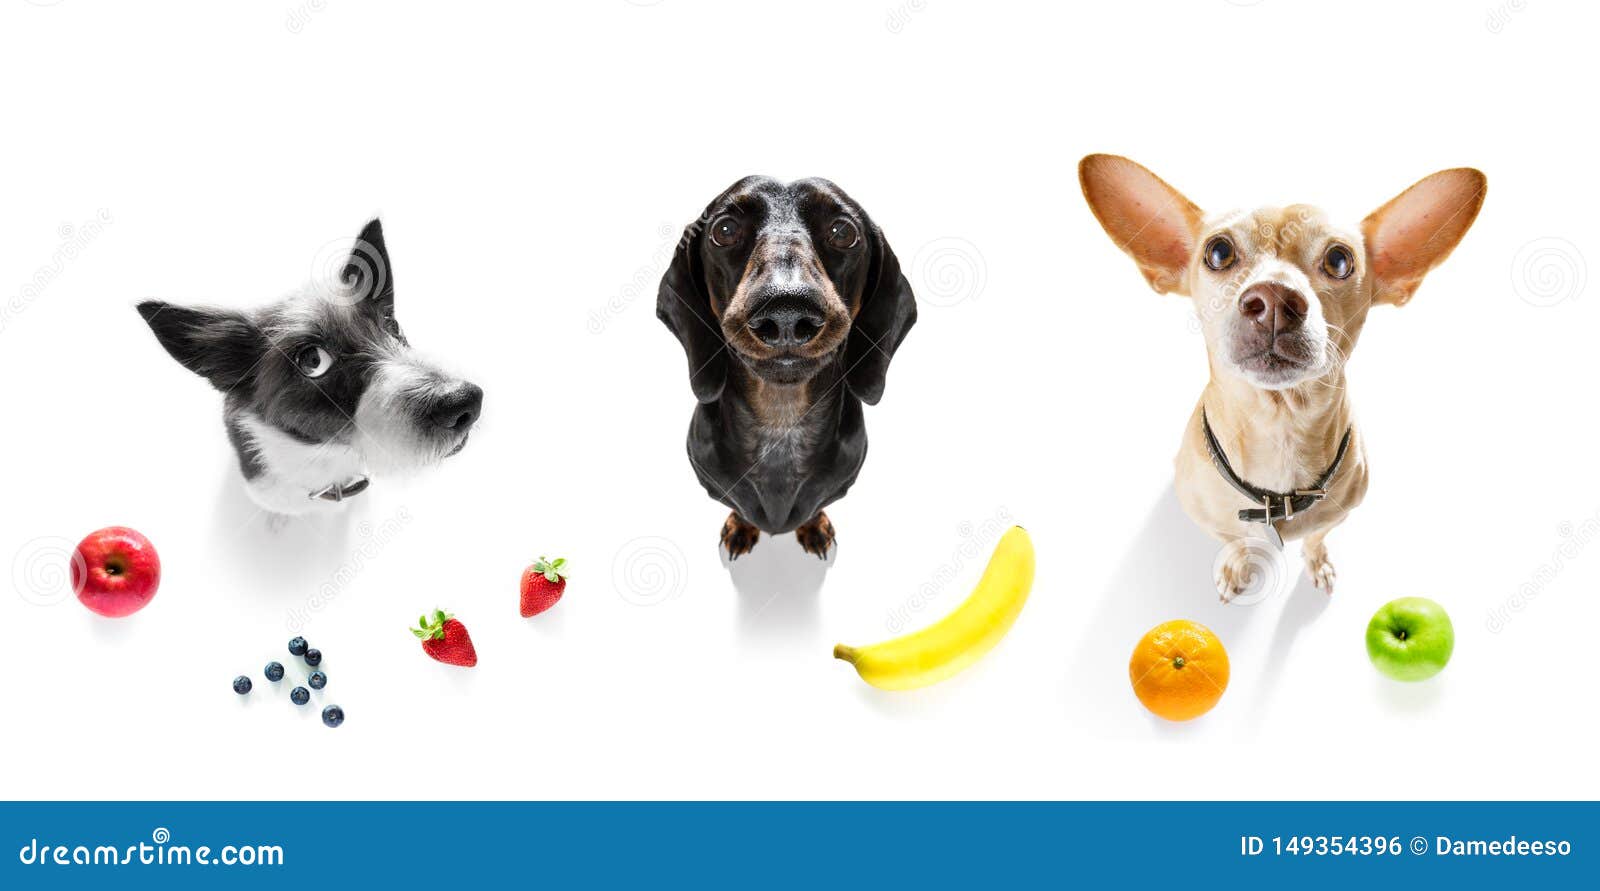 https://thumbs.dreamstime.com/z/group-dogs-overweight-fruit-group-row-dogs-guilty-conscience-overweight-to-loose-weight-isolated-149354396.jpg